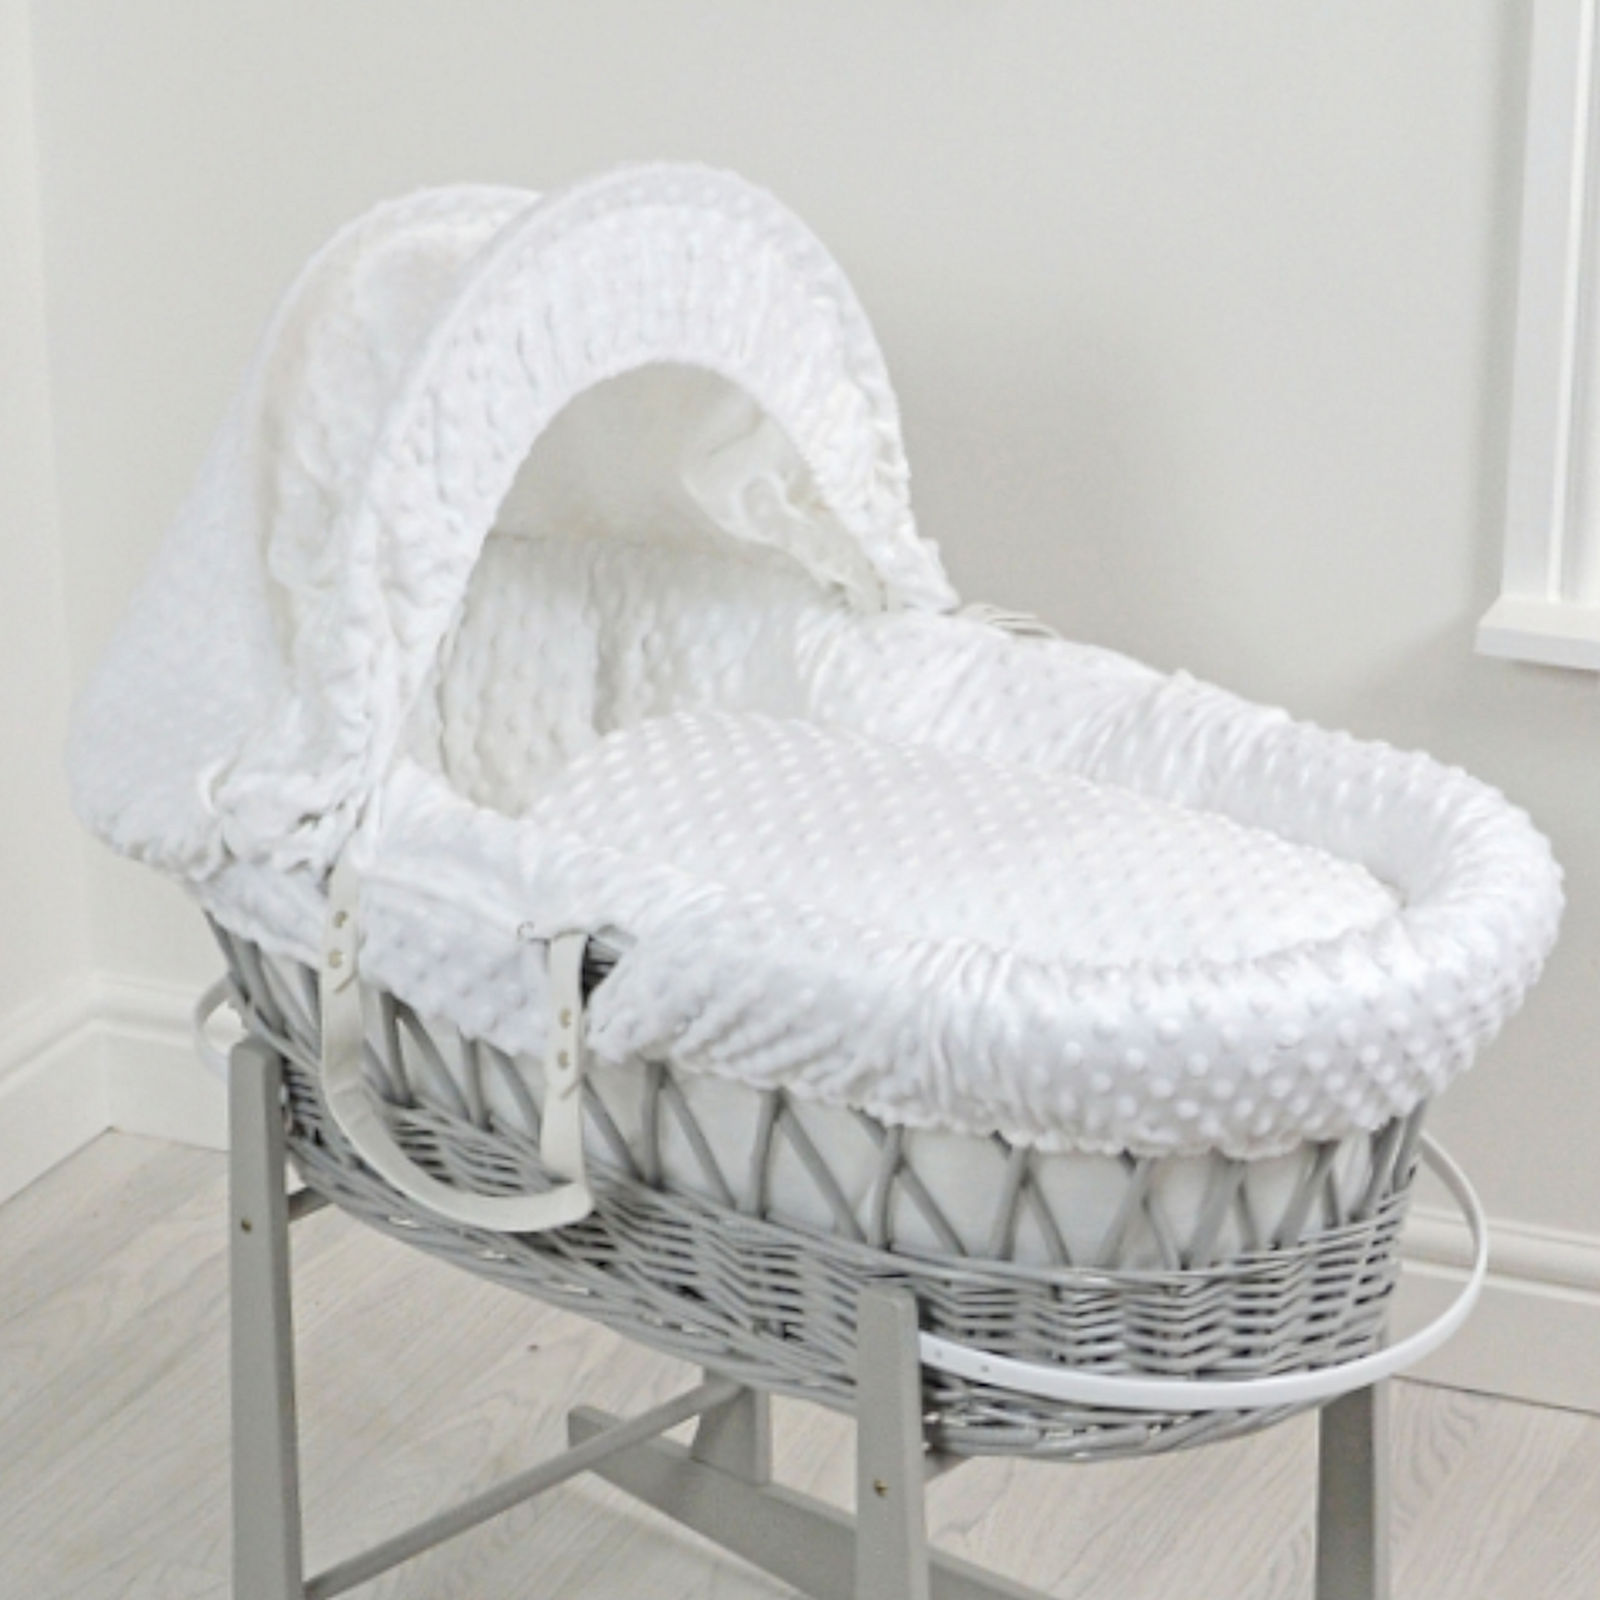 4baby Wicker Moses Basket 3 Piece Dressing Set - White Dimple